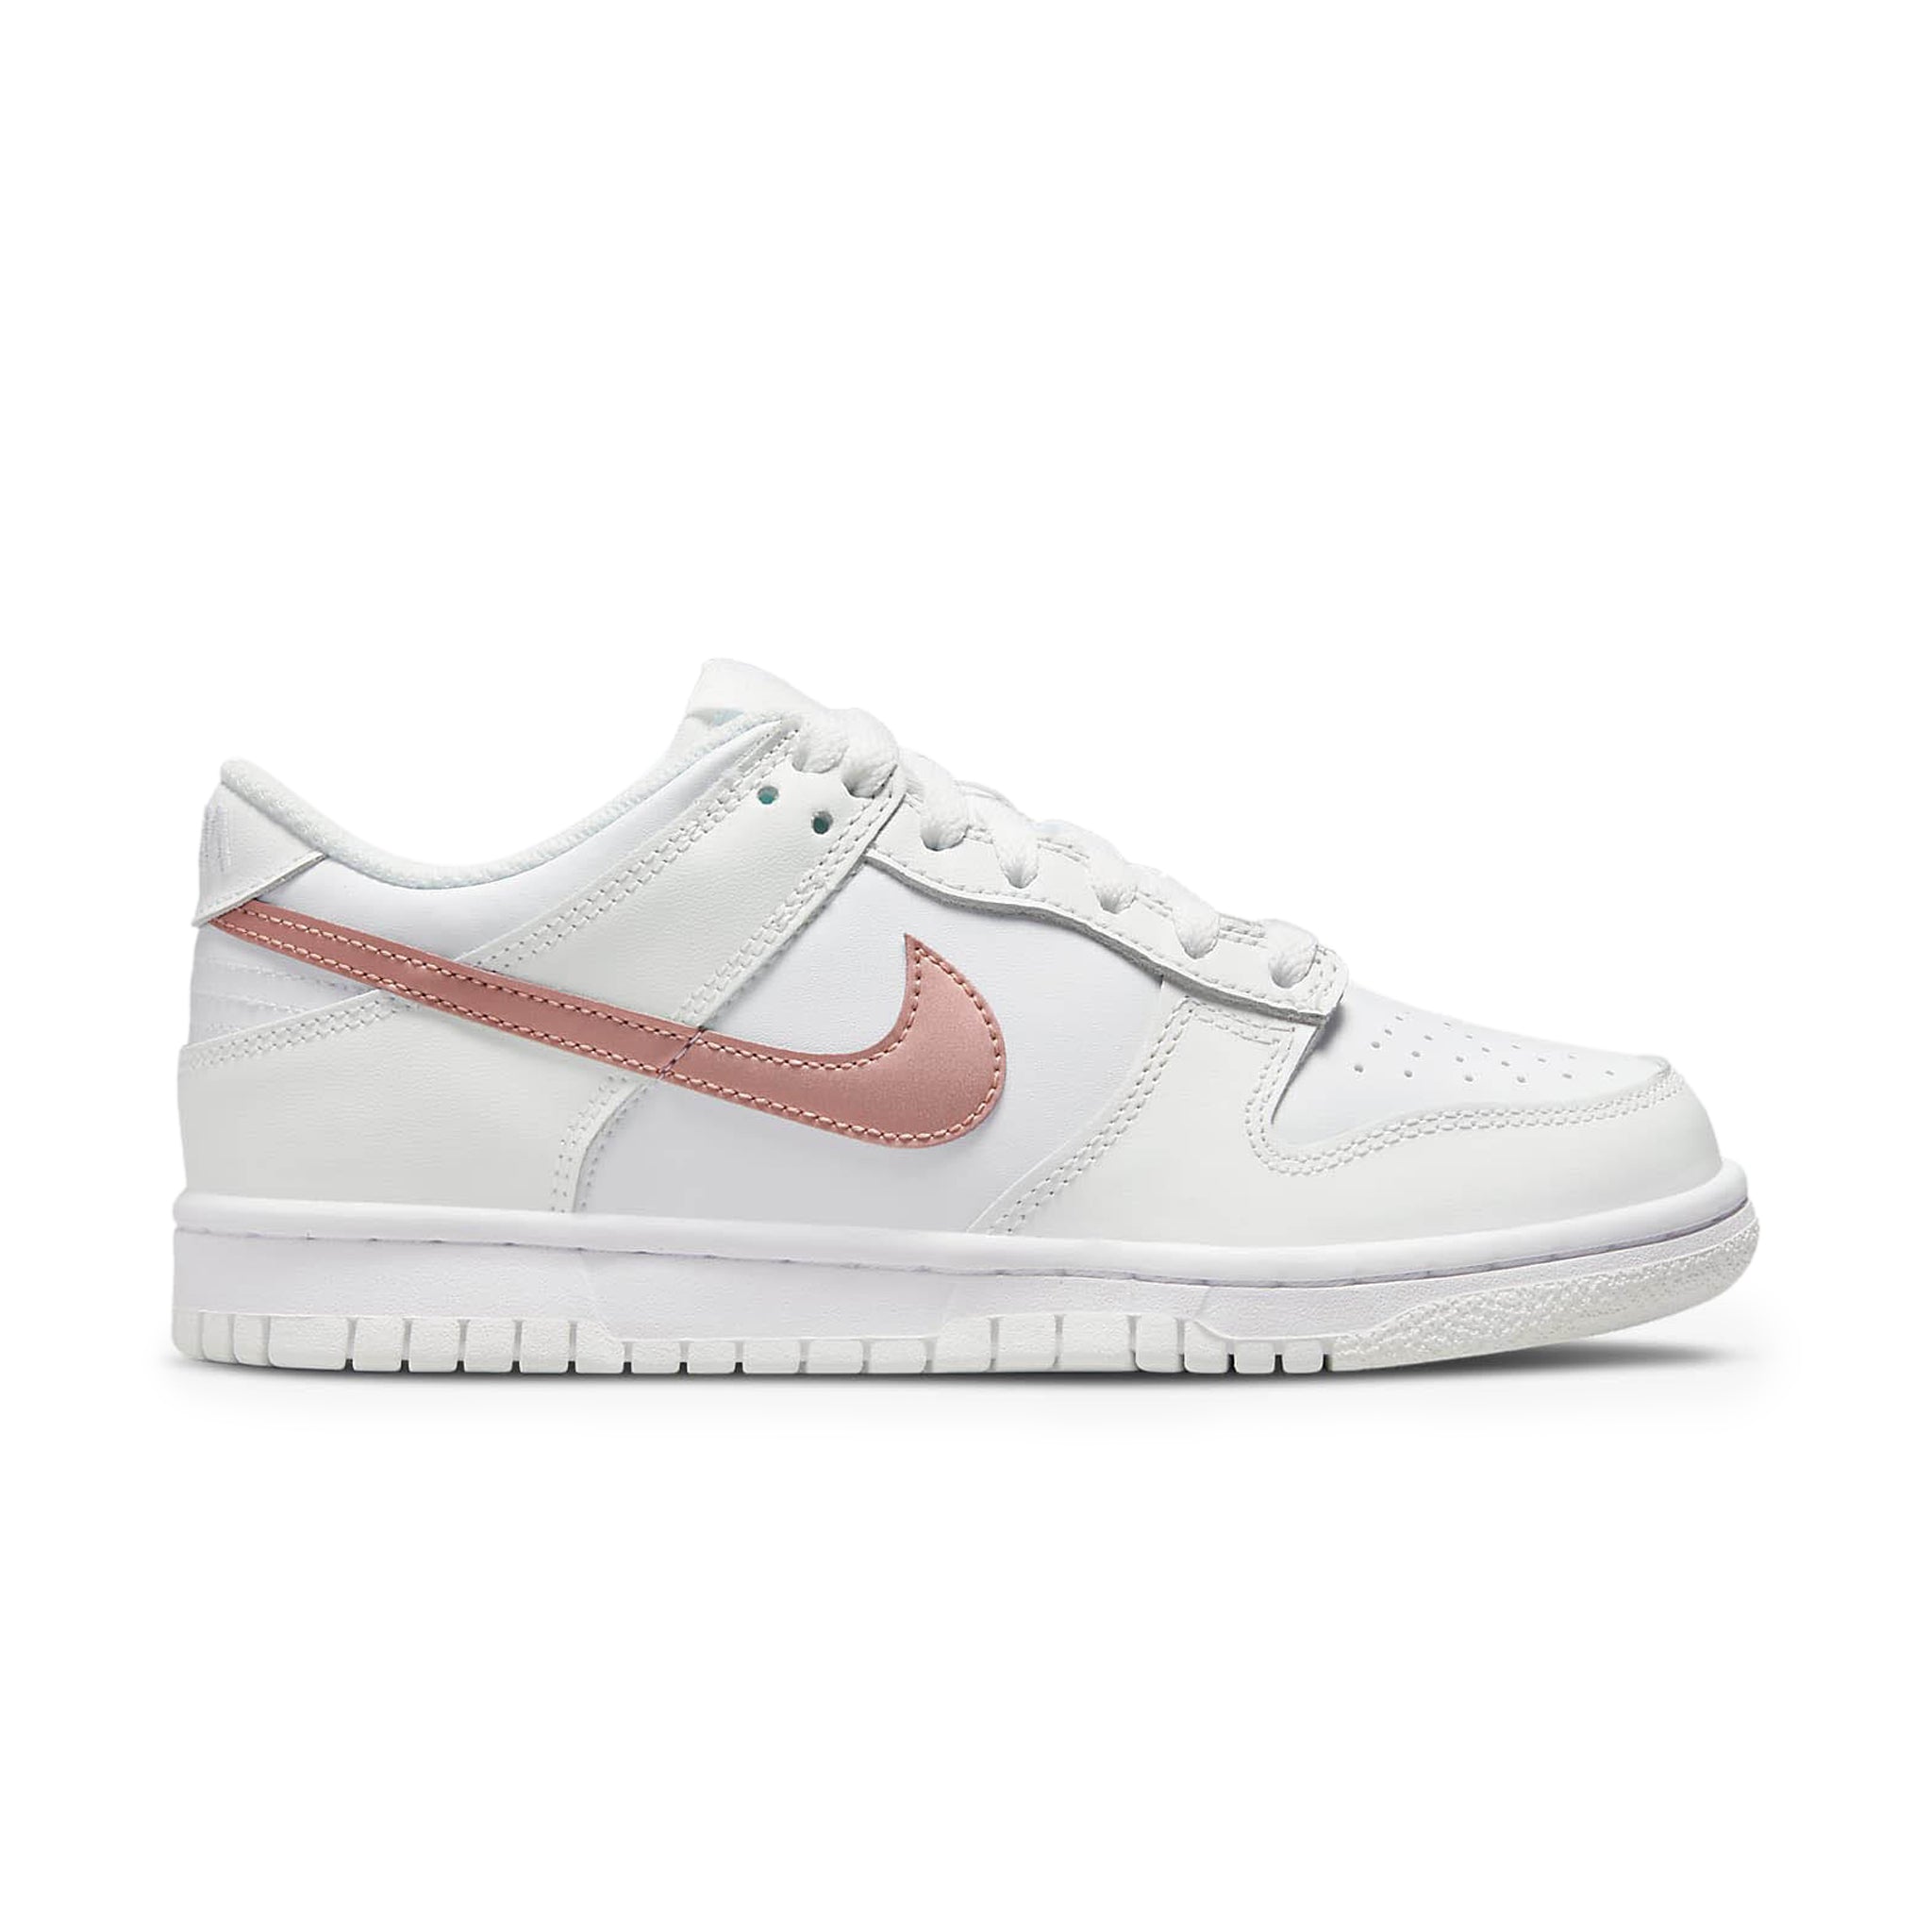 nike dunk low white pink gs dh9765 100 side